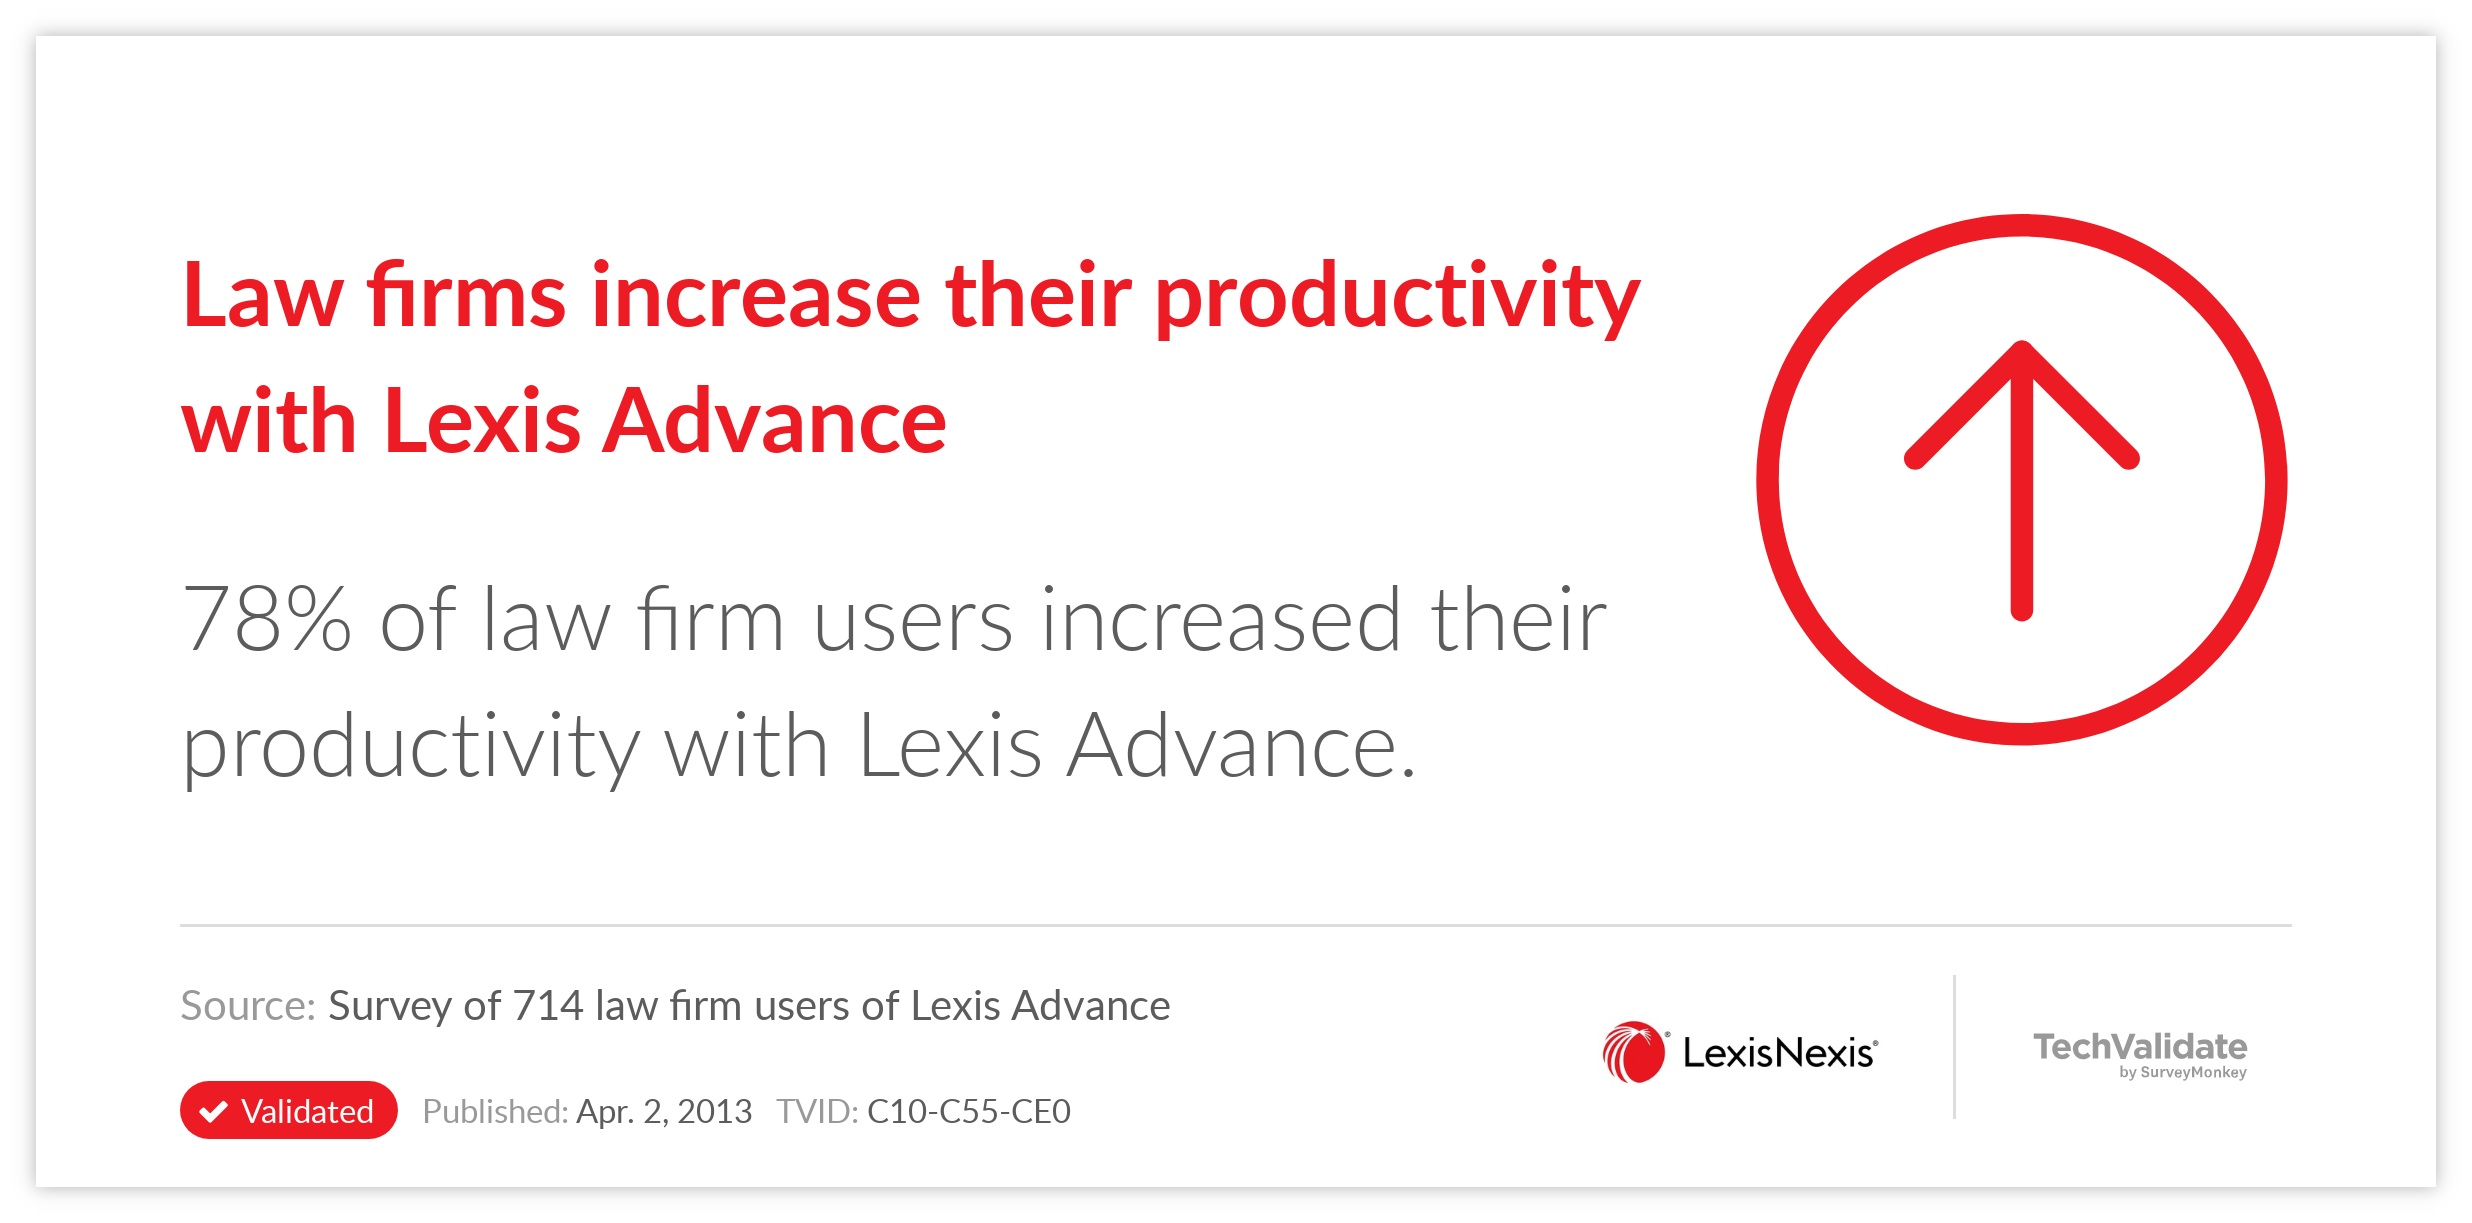 Law firms increase their productivity with Lexis Advance